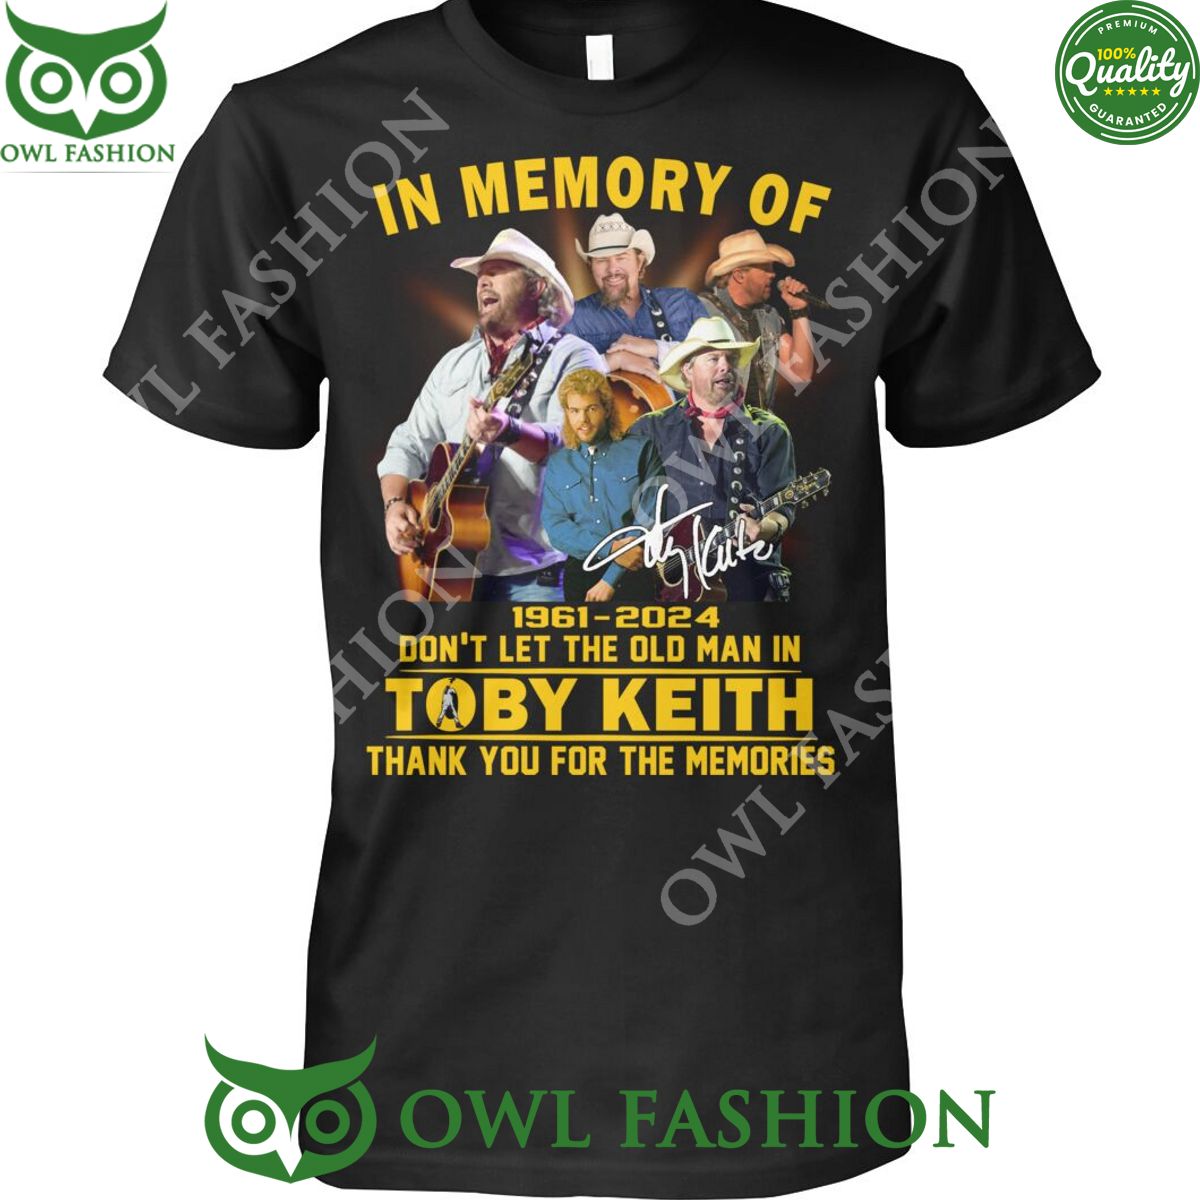 In memory of Toby Keith Thank you 1961 2024 Dont let the old man in t shirt